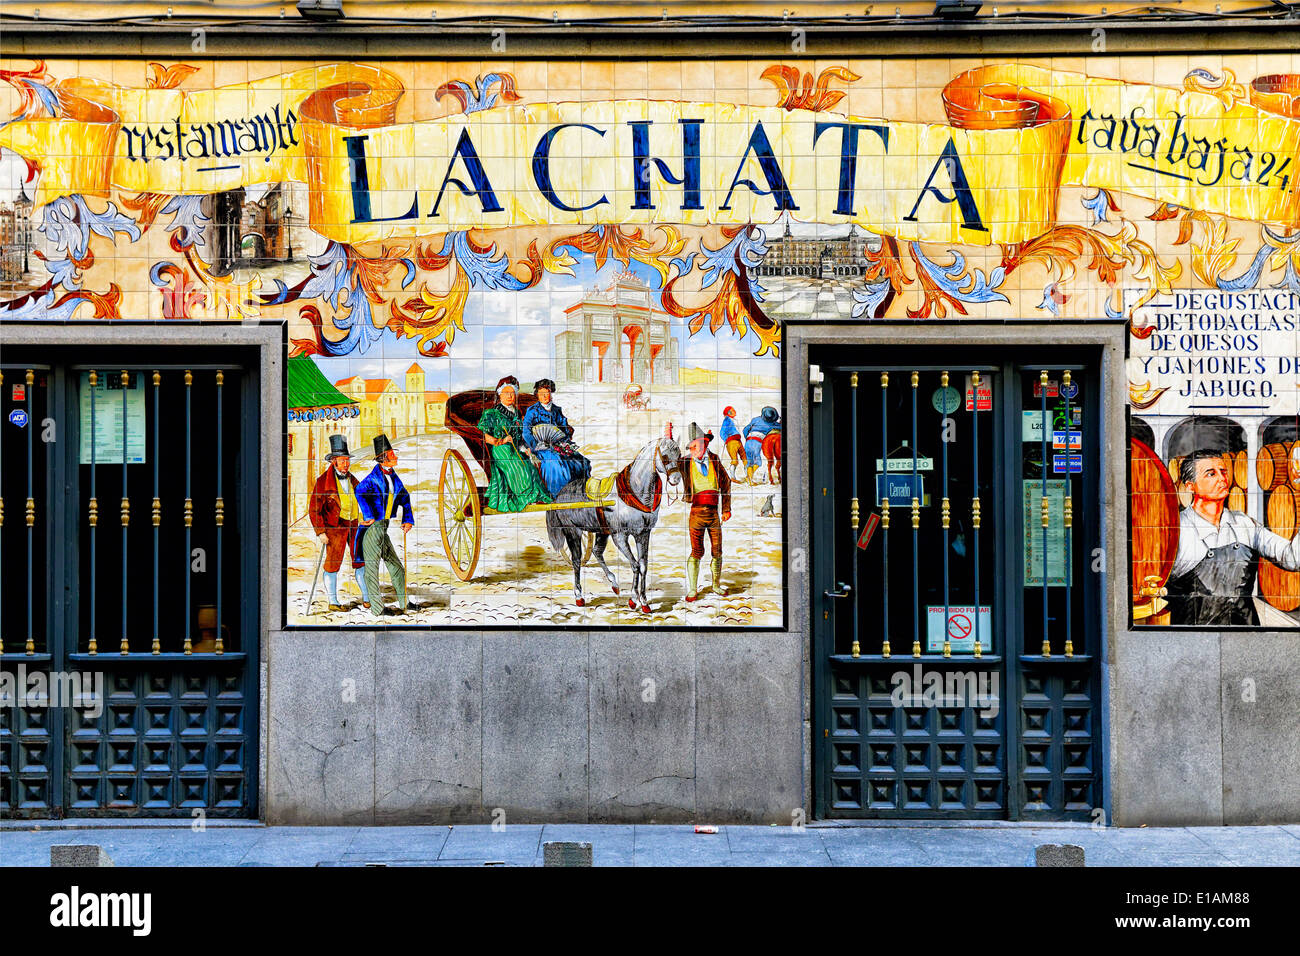 Entrance view of a Tapas Restaurant La Chata with Ornamental Tile Facade, Madrid, Spain Stock Photo